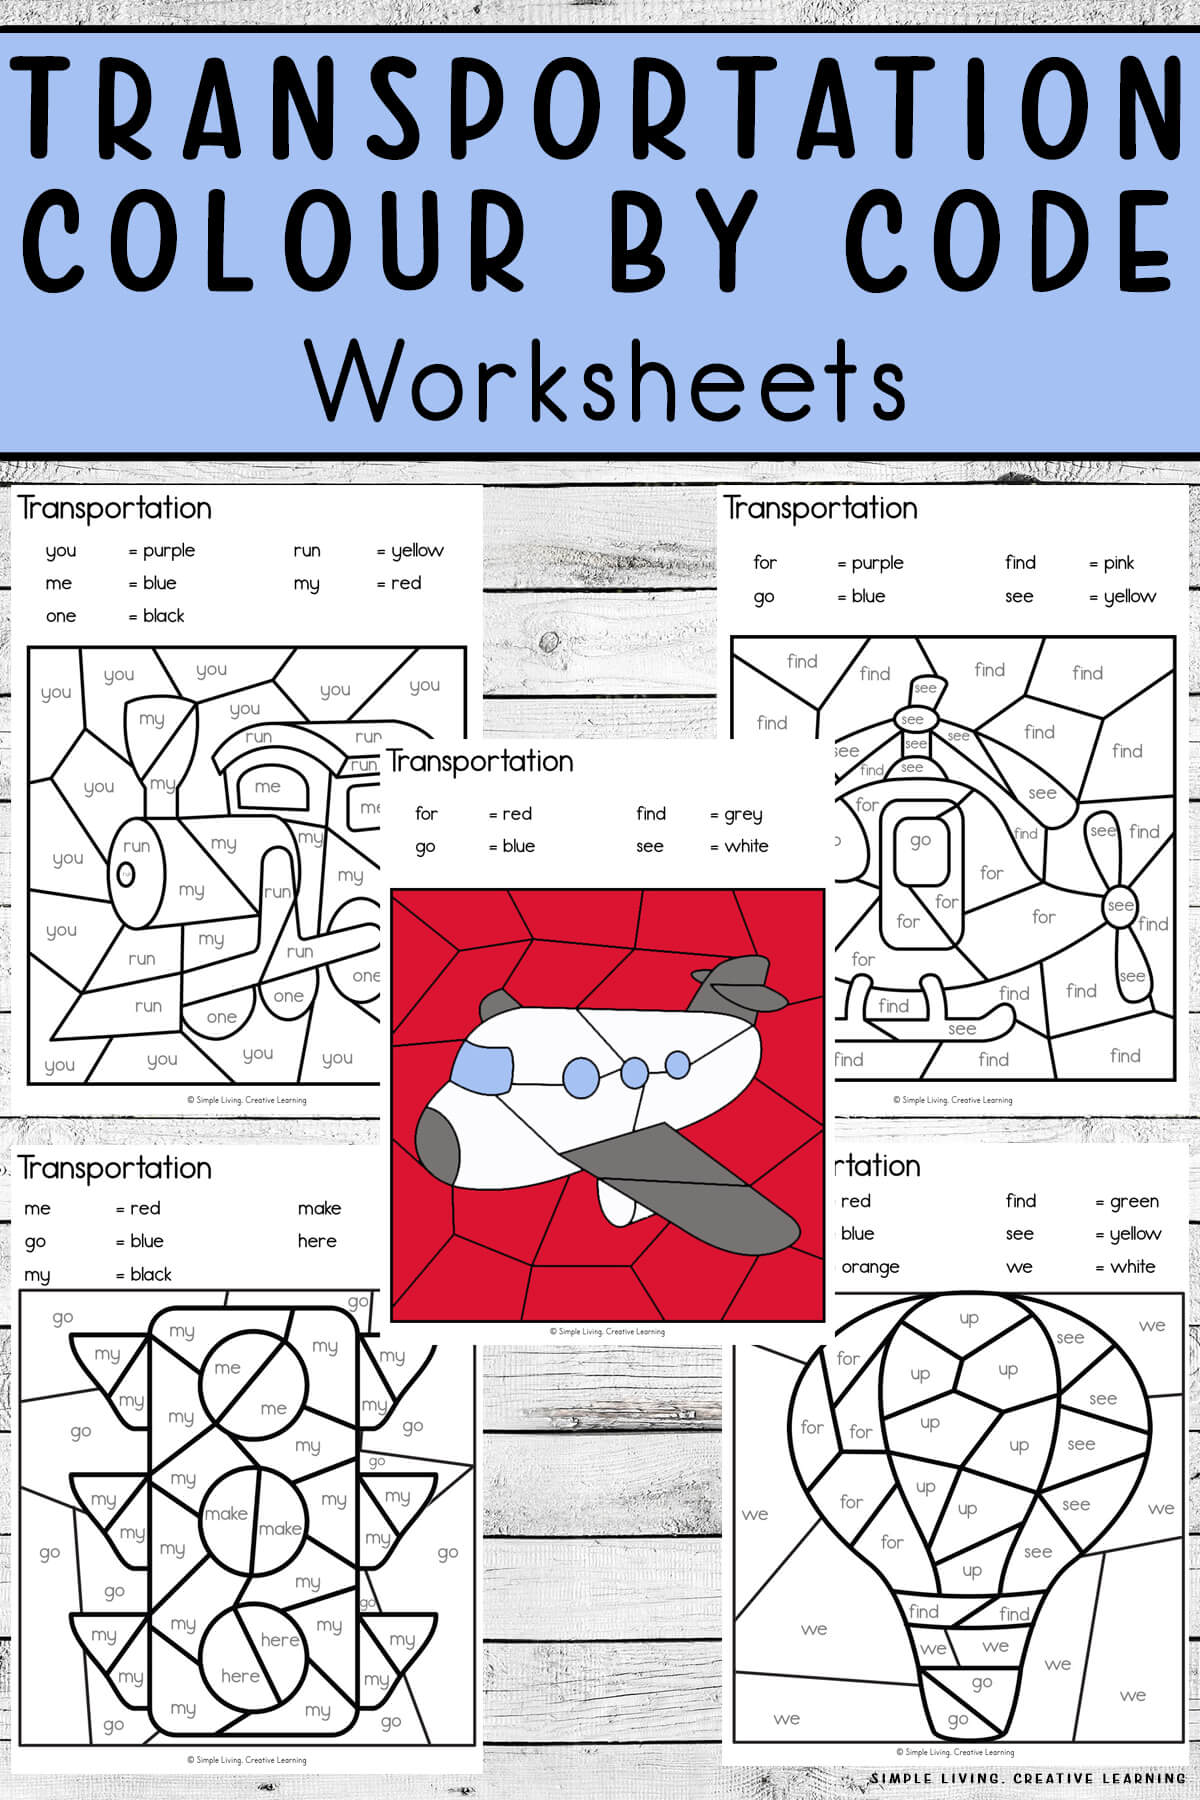 Transportation Colour By Code Worksheets